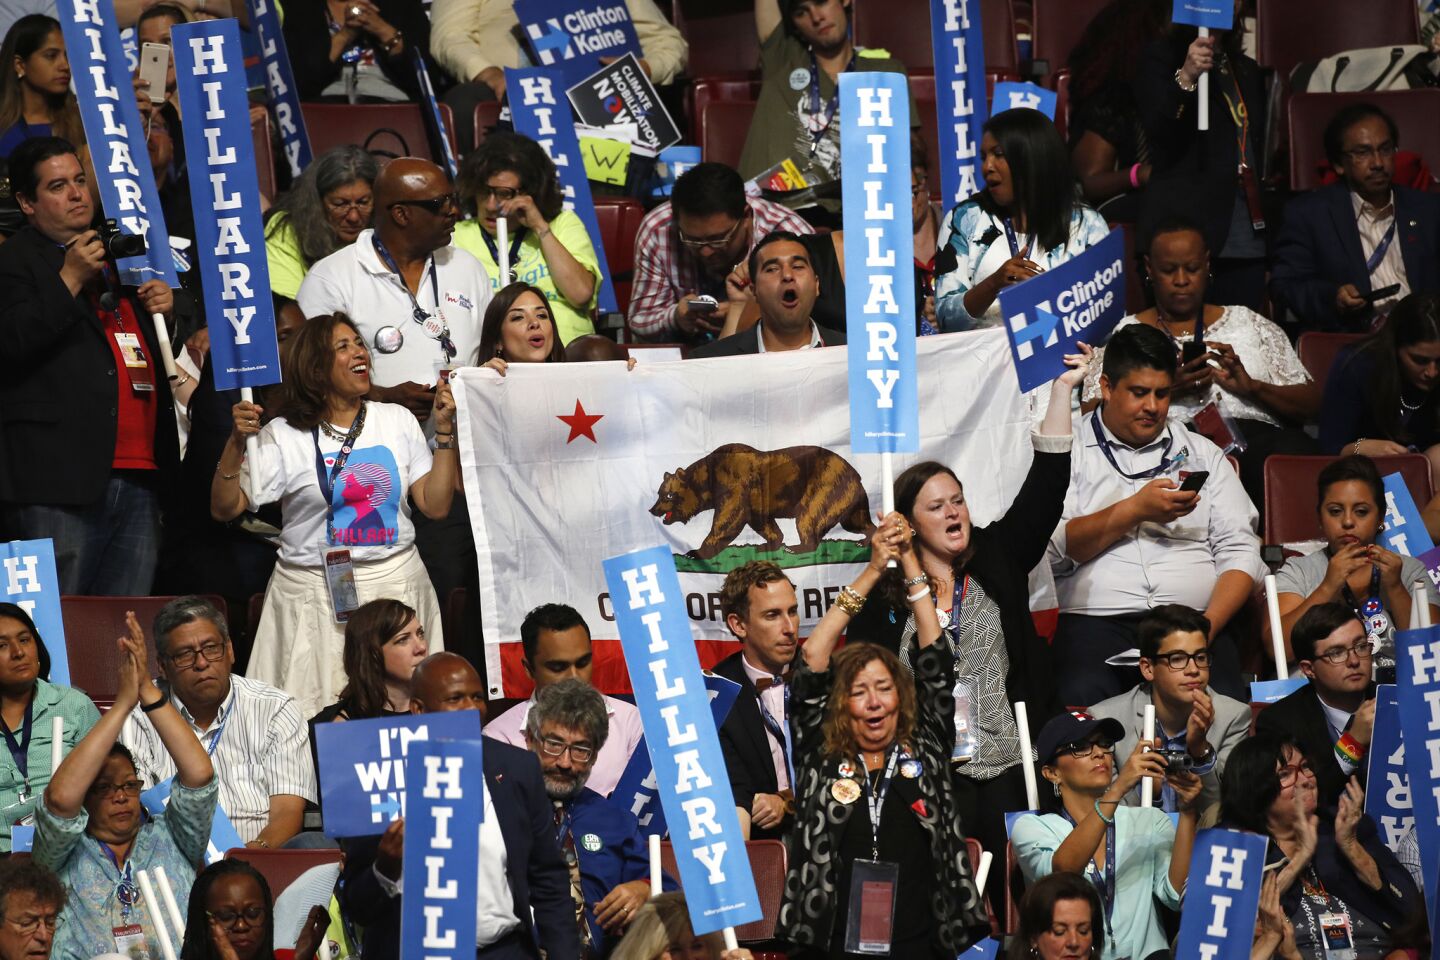 Members of the California delegation cheer for Representative Nancy Pelosi as she speaks on the final night of the Democratic National Convention in Philadelphia.